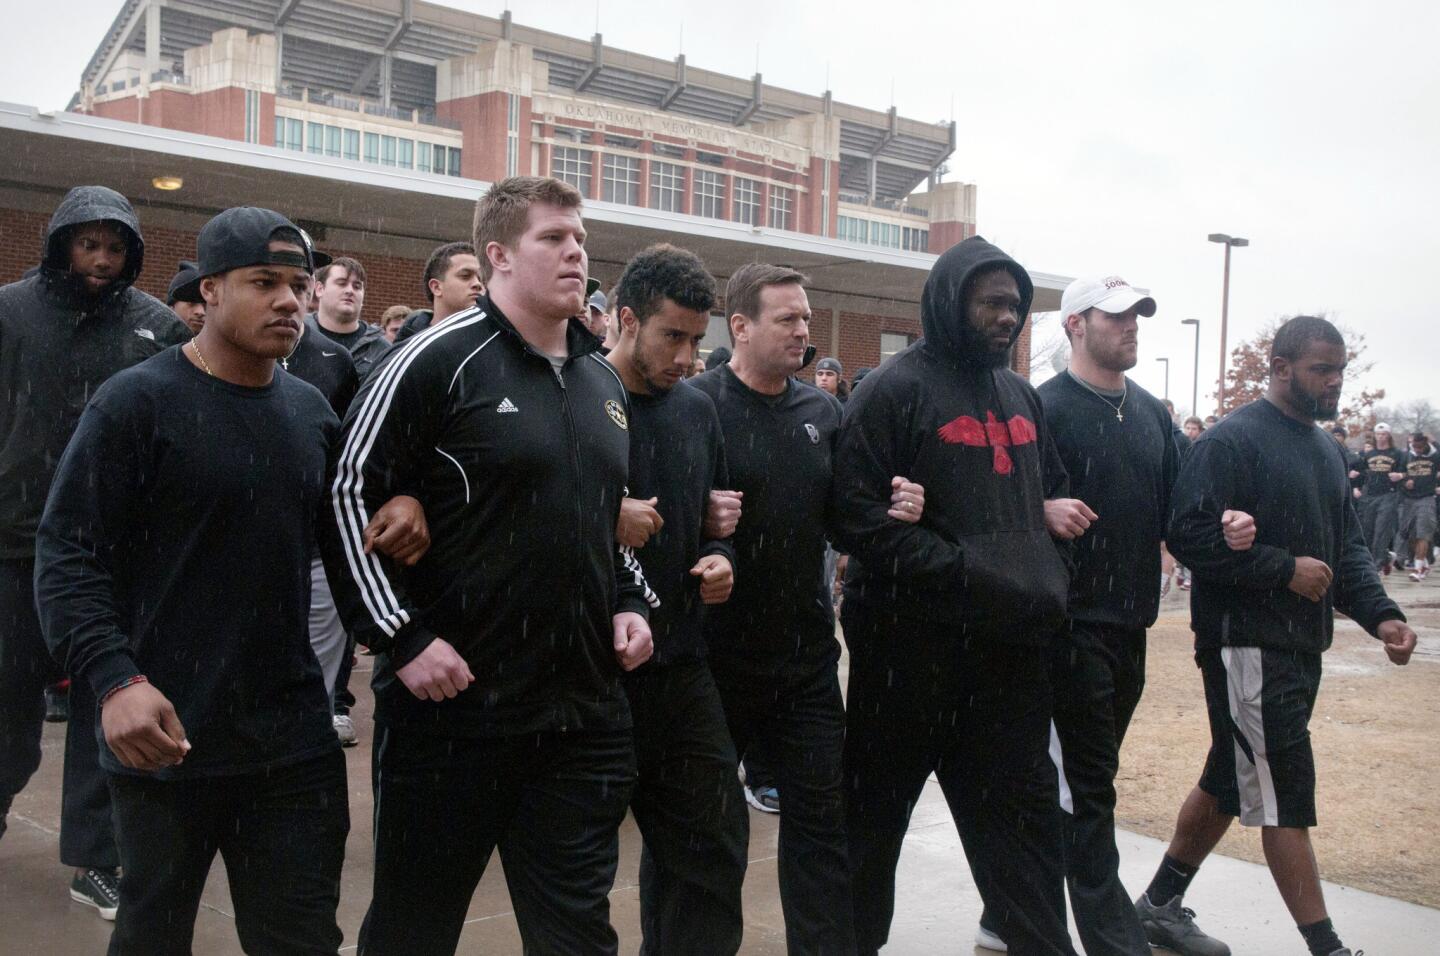 The University of Oklahoma football team and coaches walk to practice wearing all black in protest of the Sigma Alpha Epsilon fraternity's racist chant.